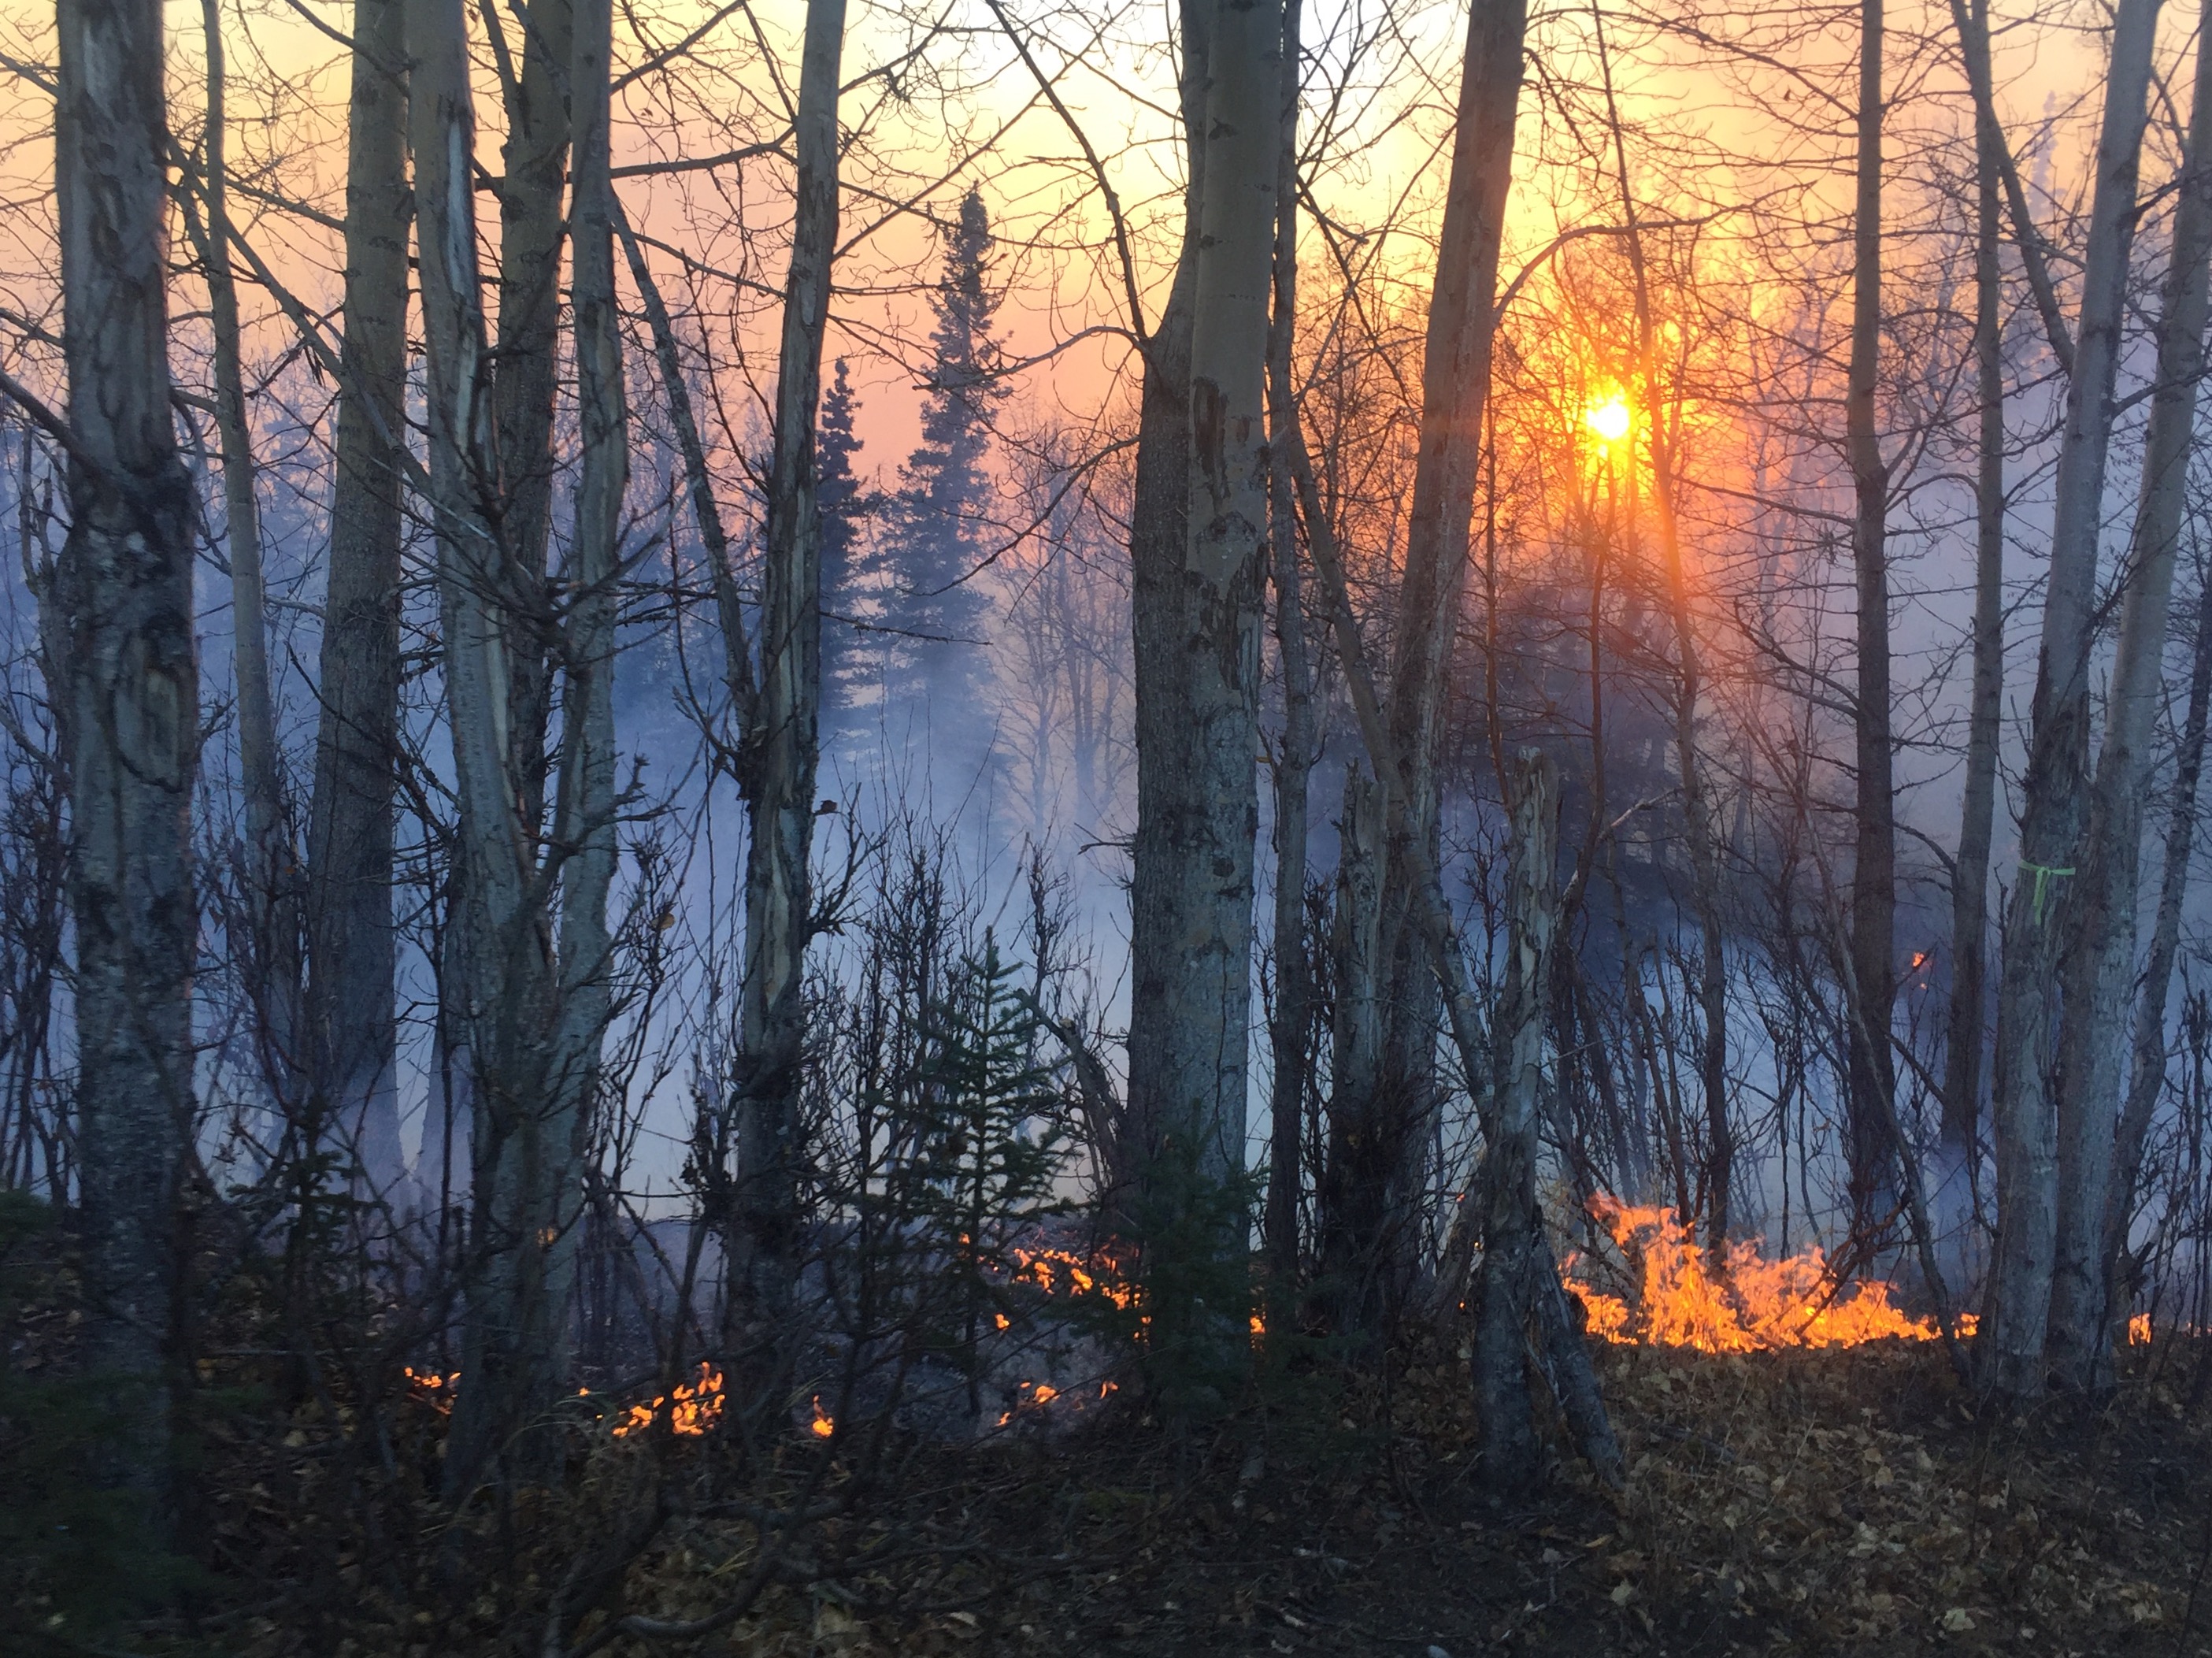 Surface fuels burn in the Moose Creek Fire late Saturday afternoon near Sutton. The fire is now estimated at 216 acres and there are 50 personnel working to suppress it. (Photo by Sarah Saarloos/Alaska Division of Forestry)